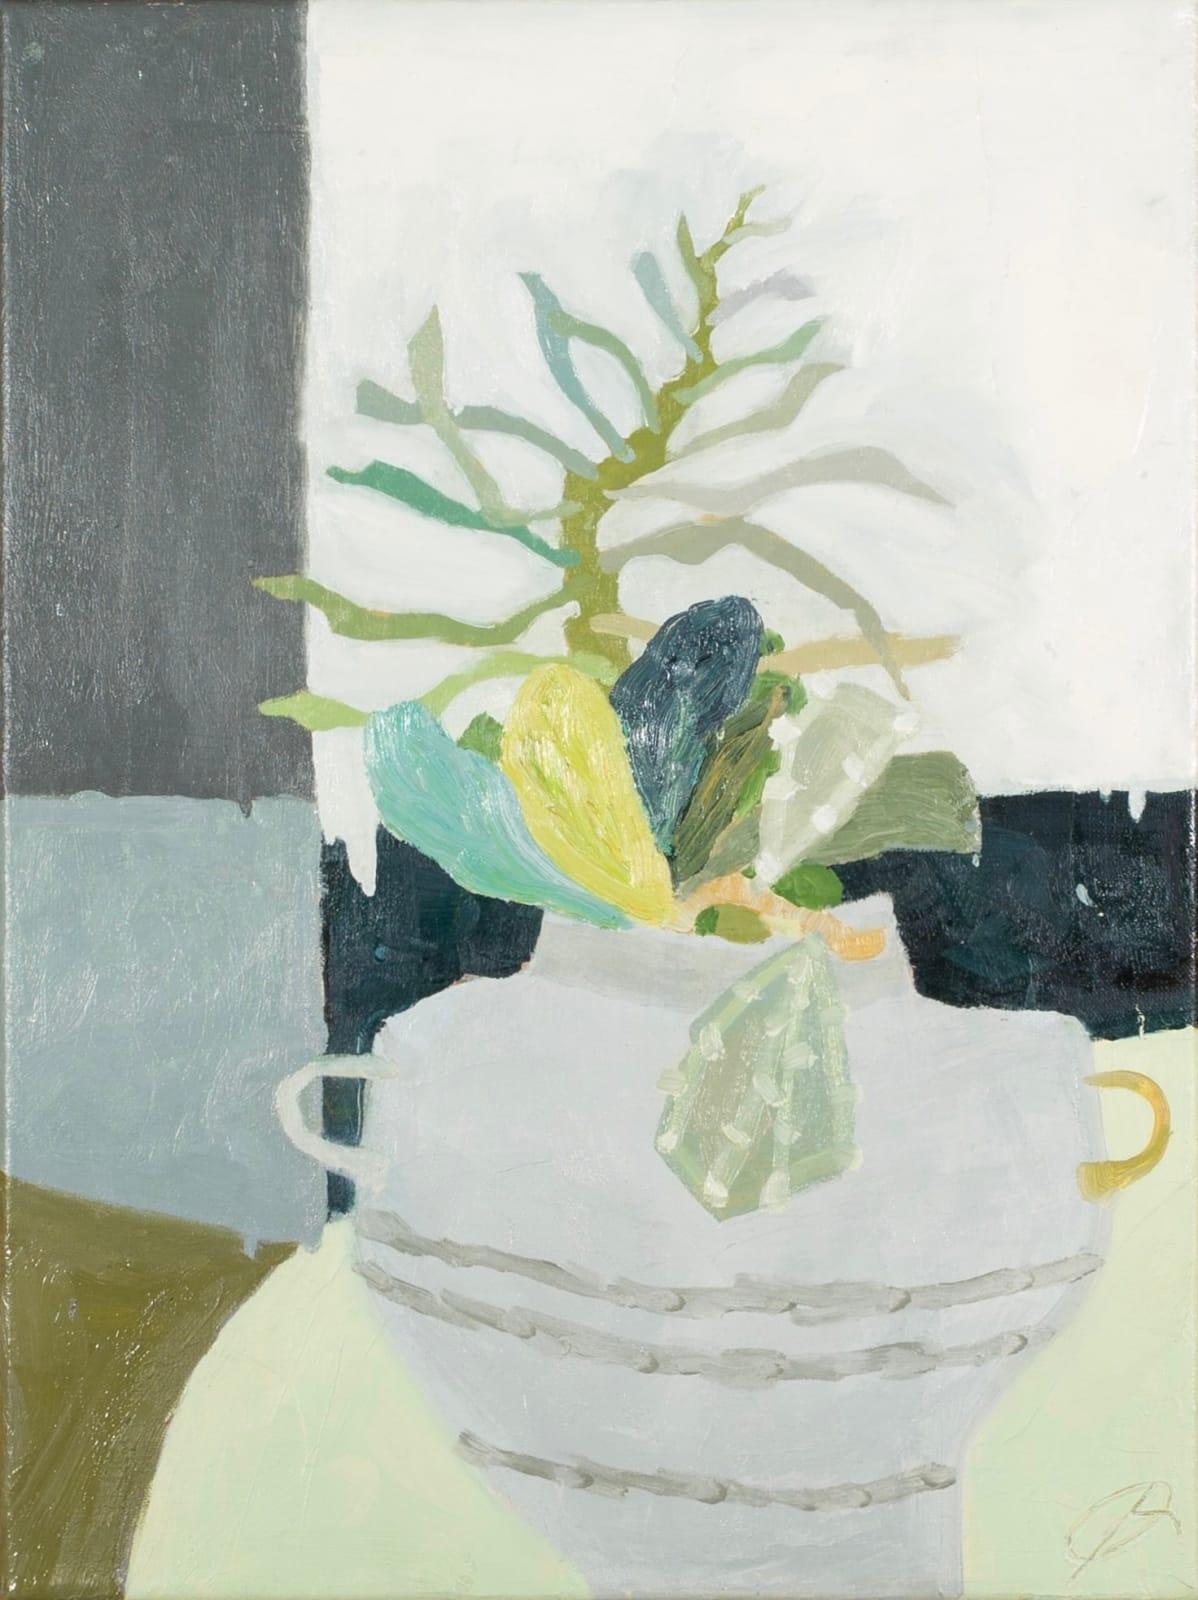 Greens in the Greys Painting by Richard Ballinger B. 1957, 2023

Additional information:
Medium: Oil on canvas
Dimensions: 40.5 x 30.5 cm
16 x 12 in
Signed, titled and dated verso.

Richard Ballinger is a British landscape and still-life